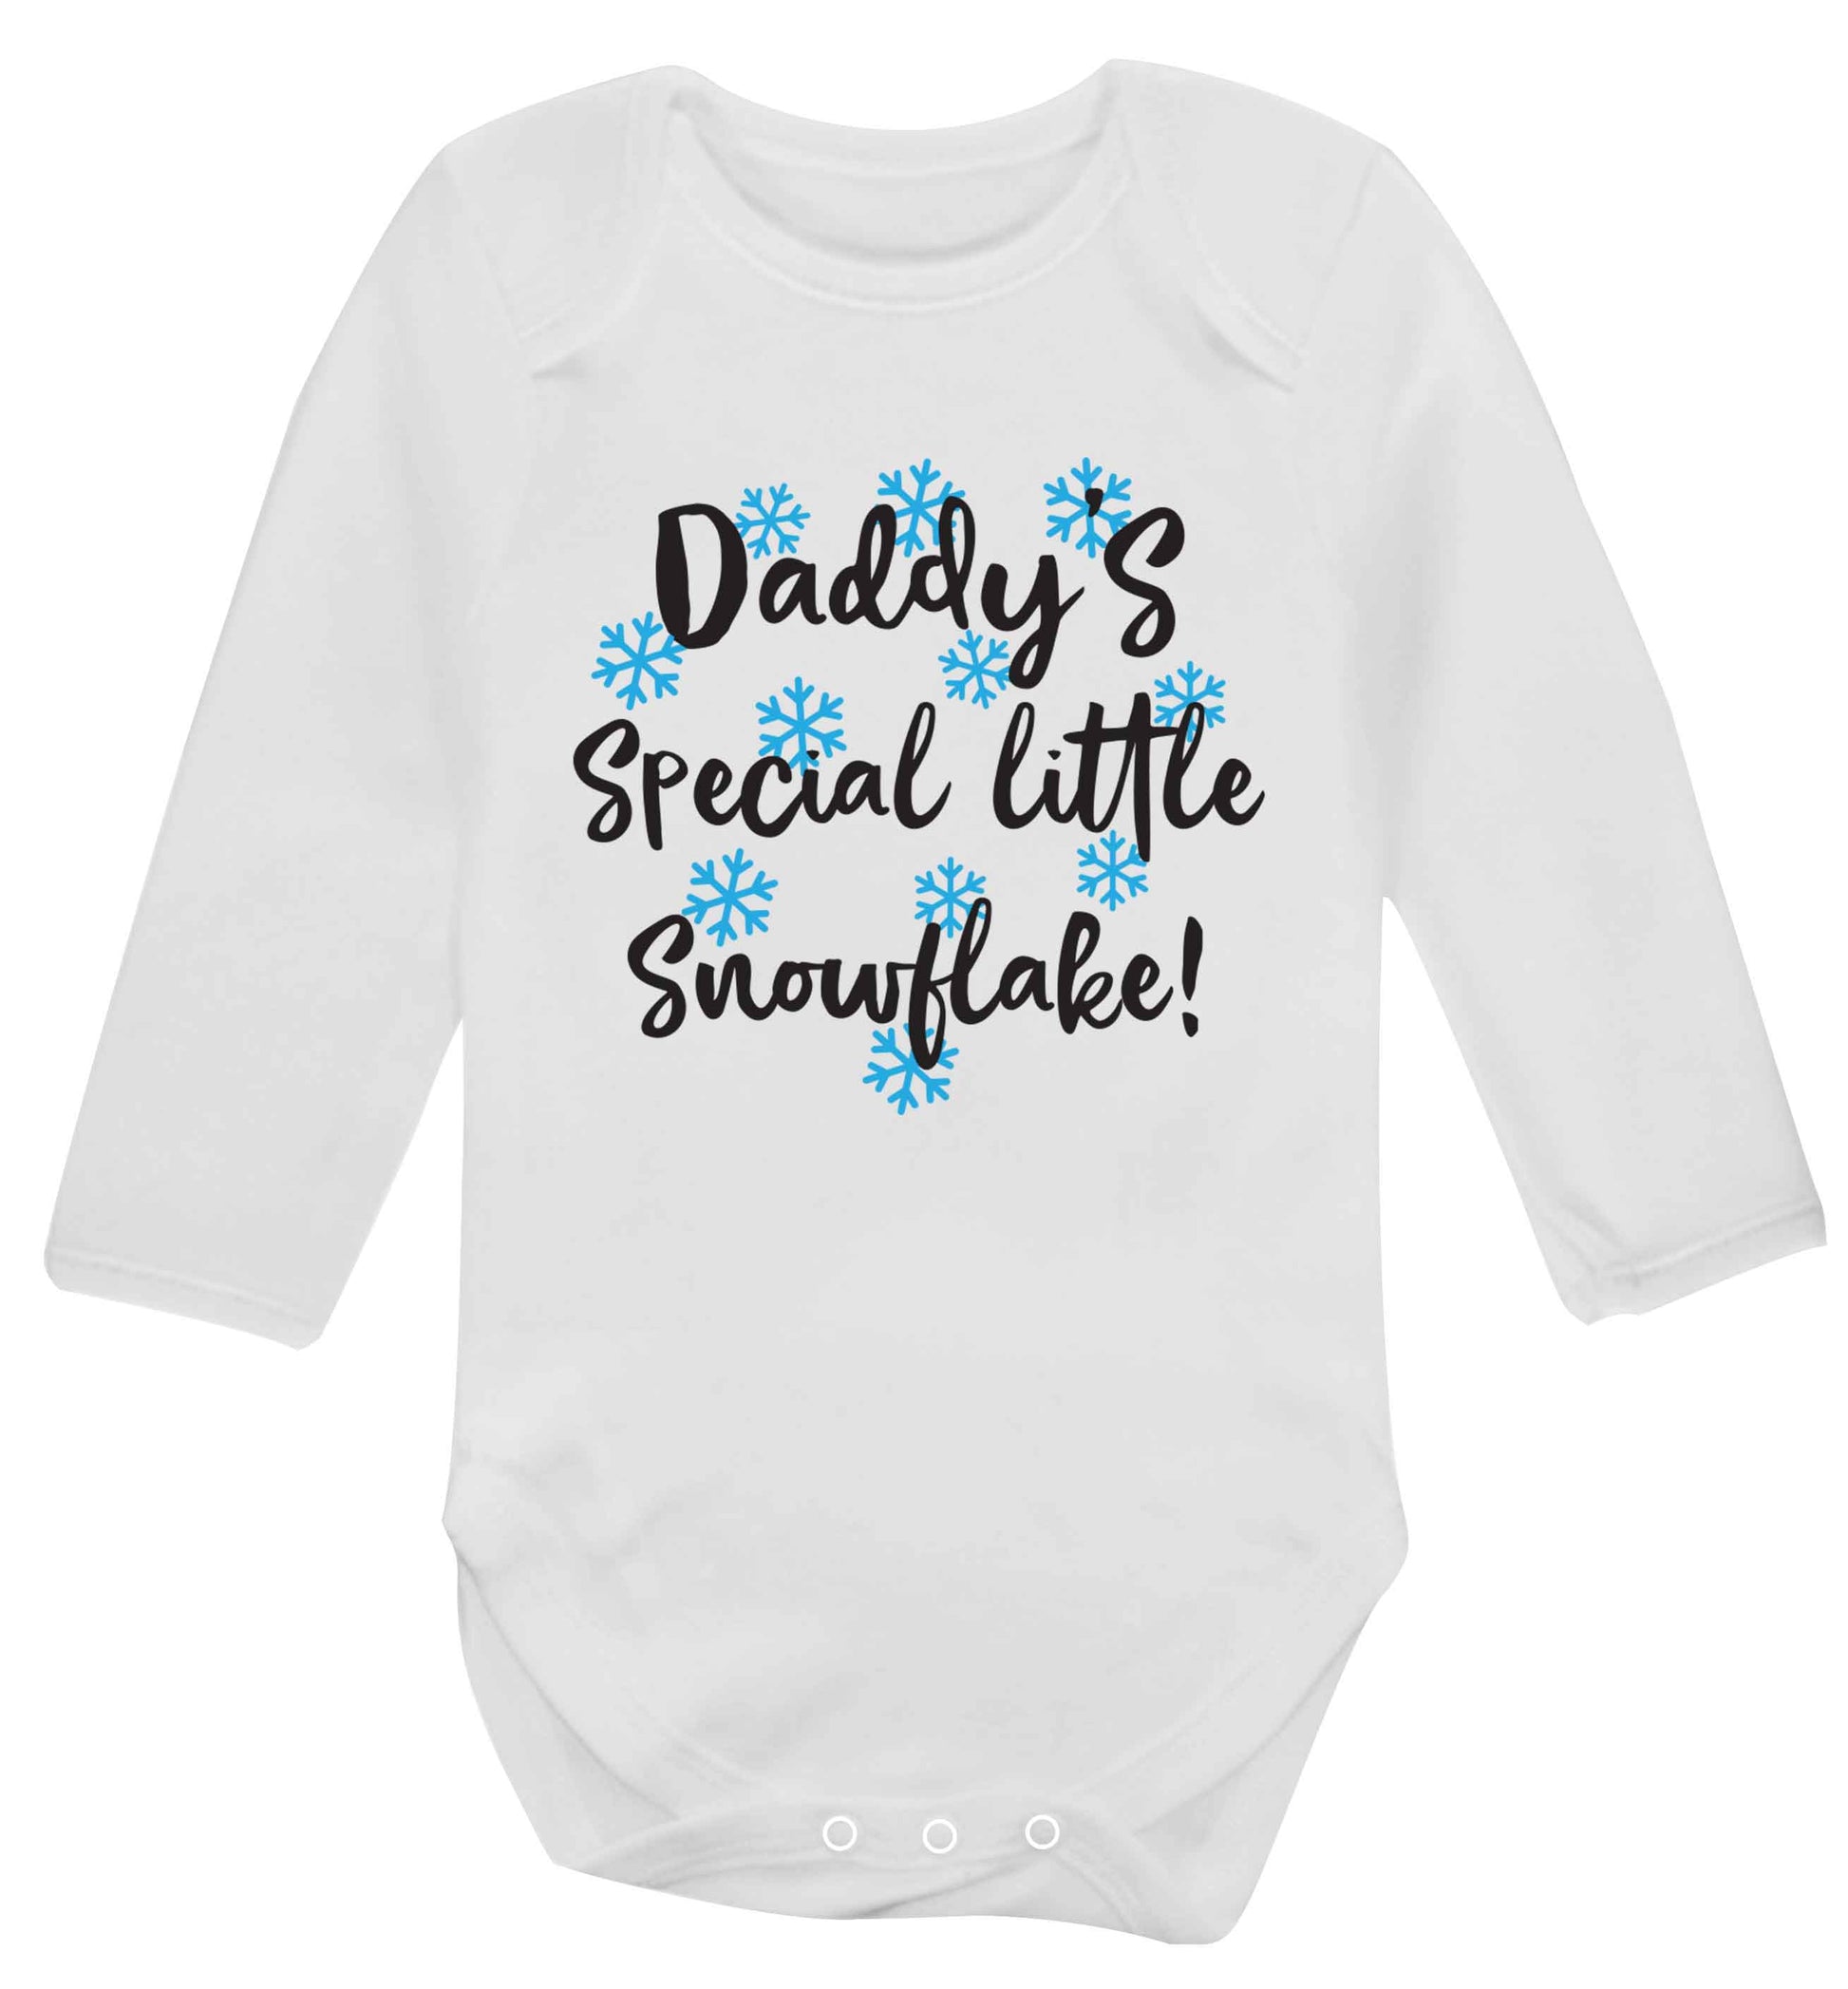 Daddy's special little snowflake Baby Vest long sleeved white 6-12 months